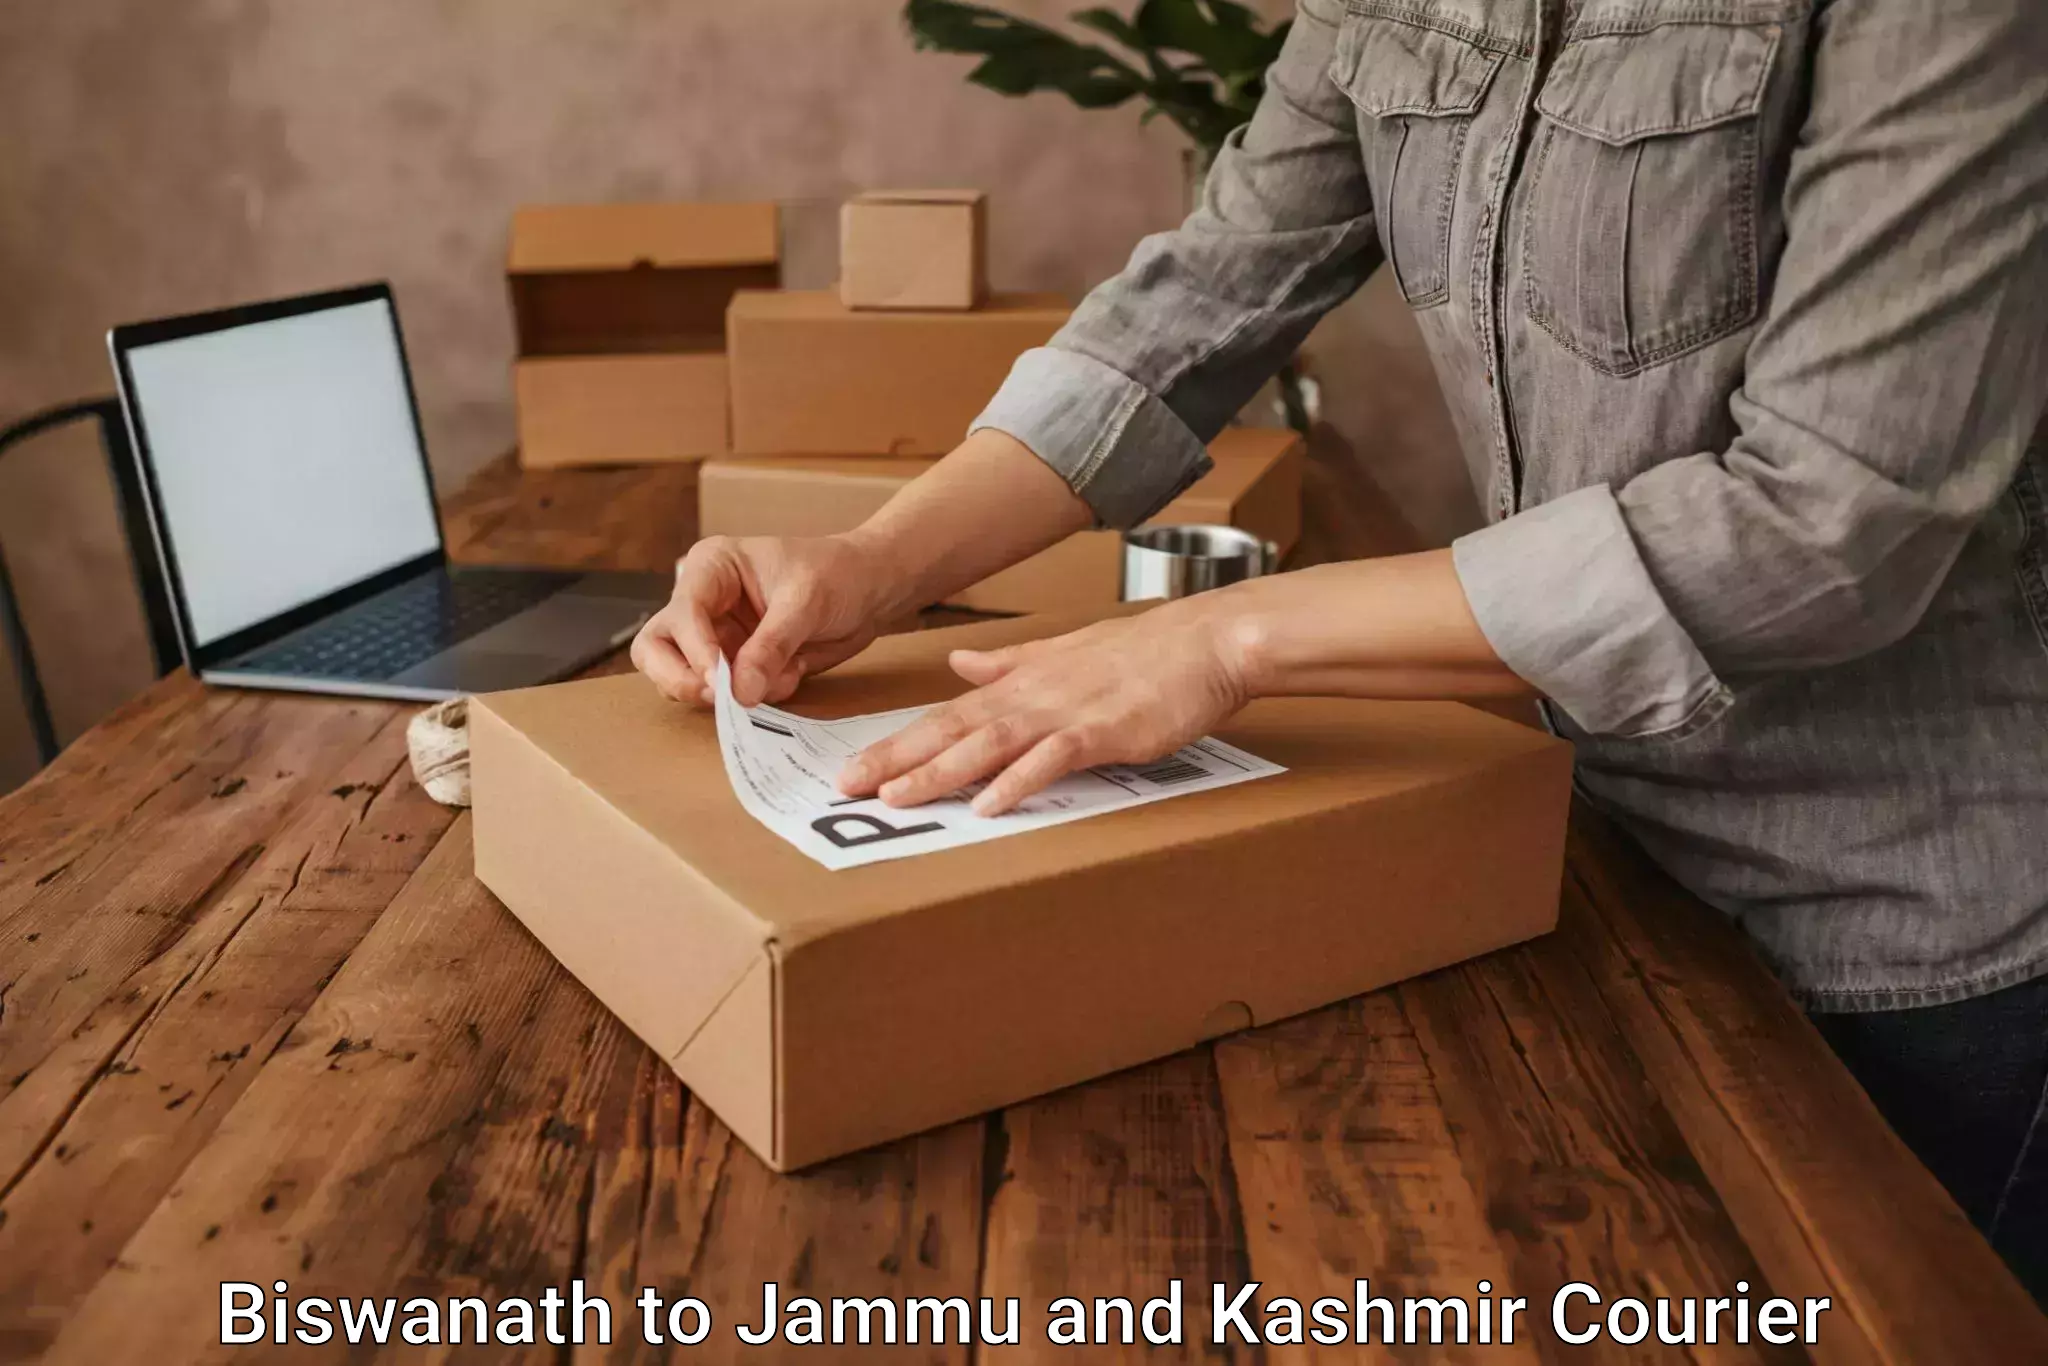 Next day courier in Biswanath to Sopore